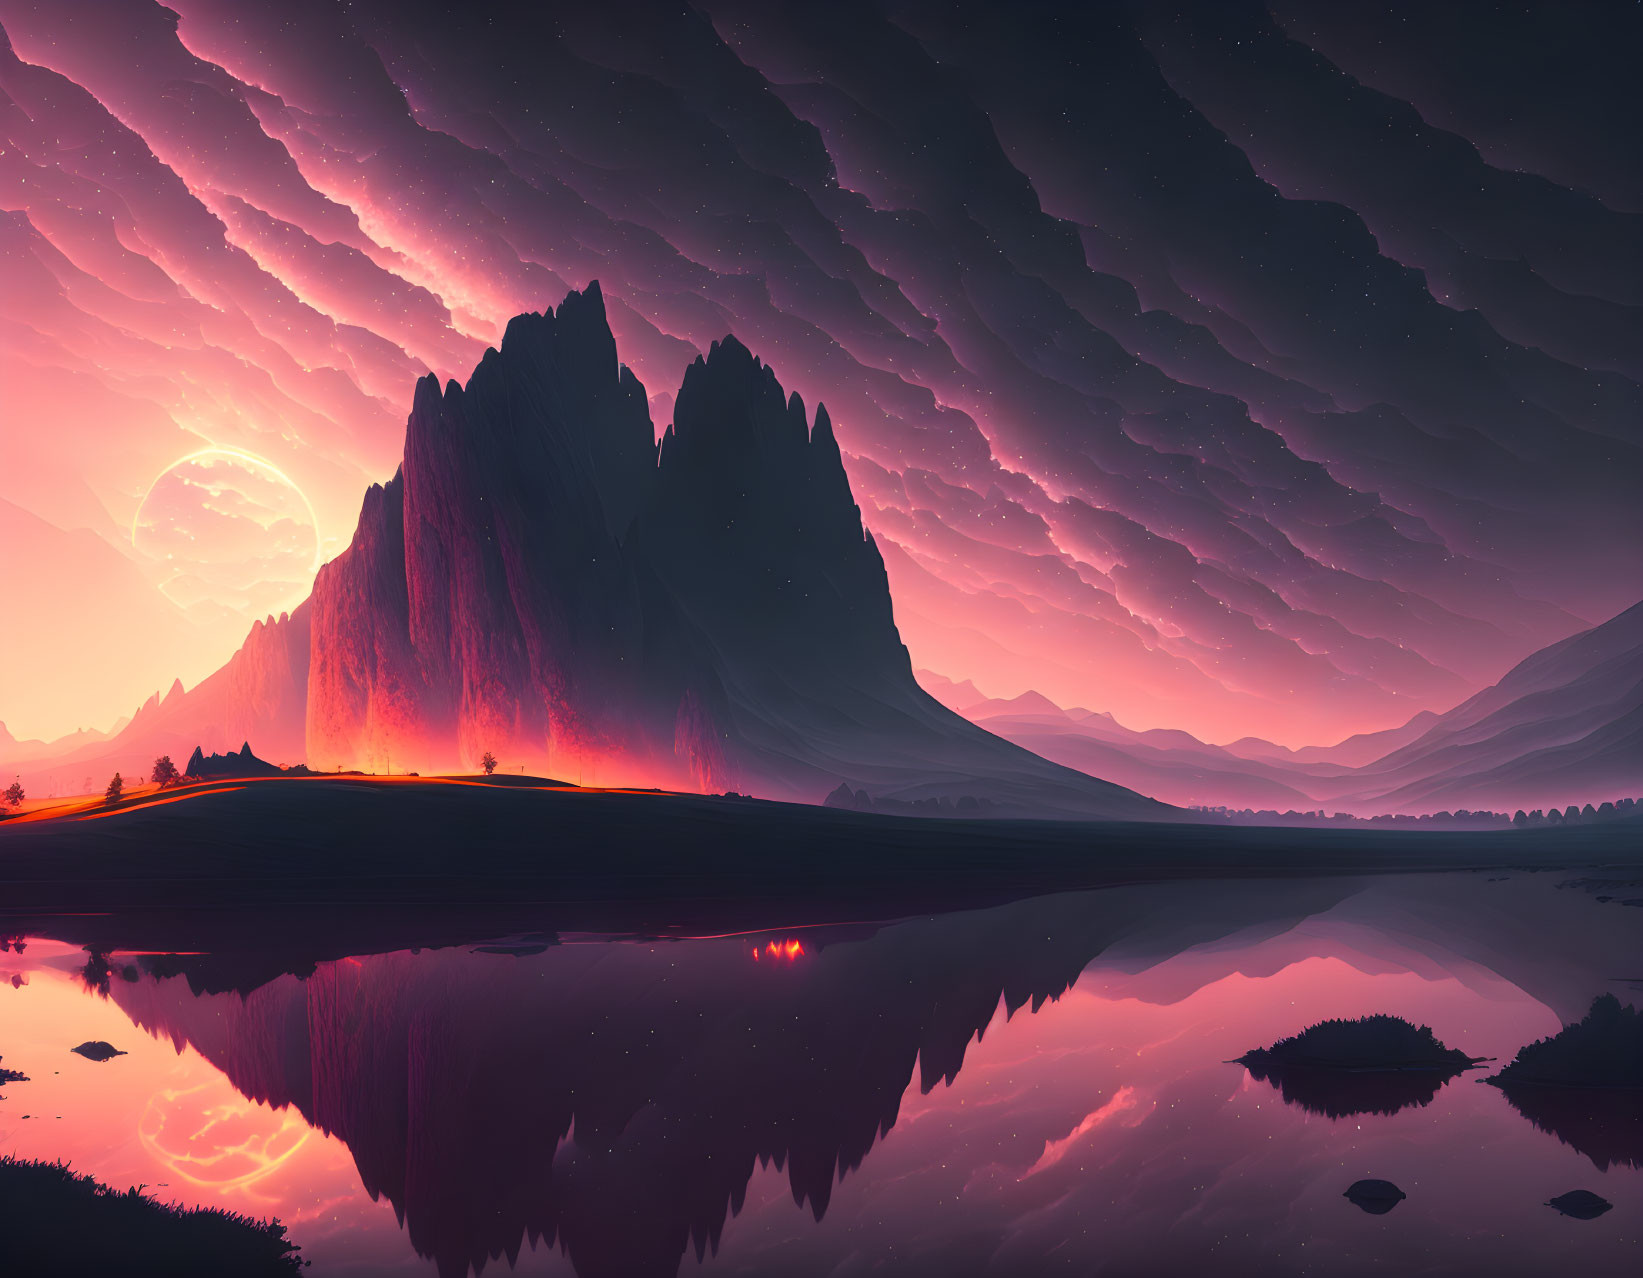 Surreal landscape with mountain, purple sky, and reflective lake